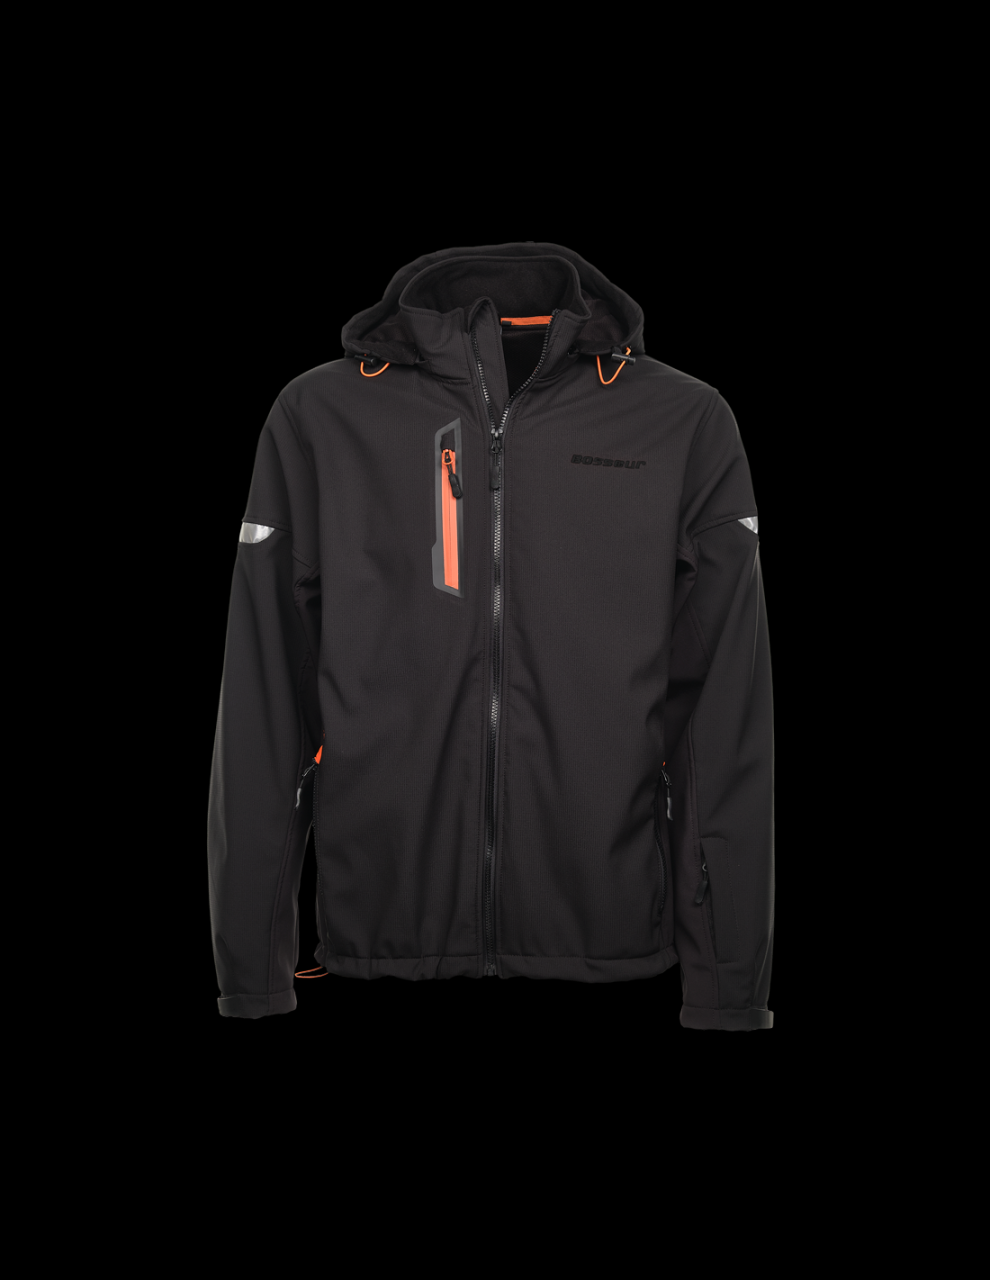 veste-softshell-doublee-trident-t-m-11500-002-tsd-confect-0